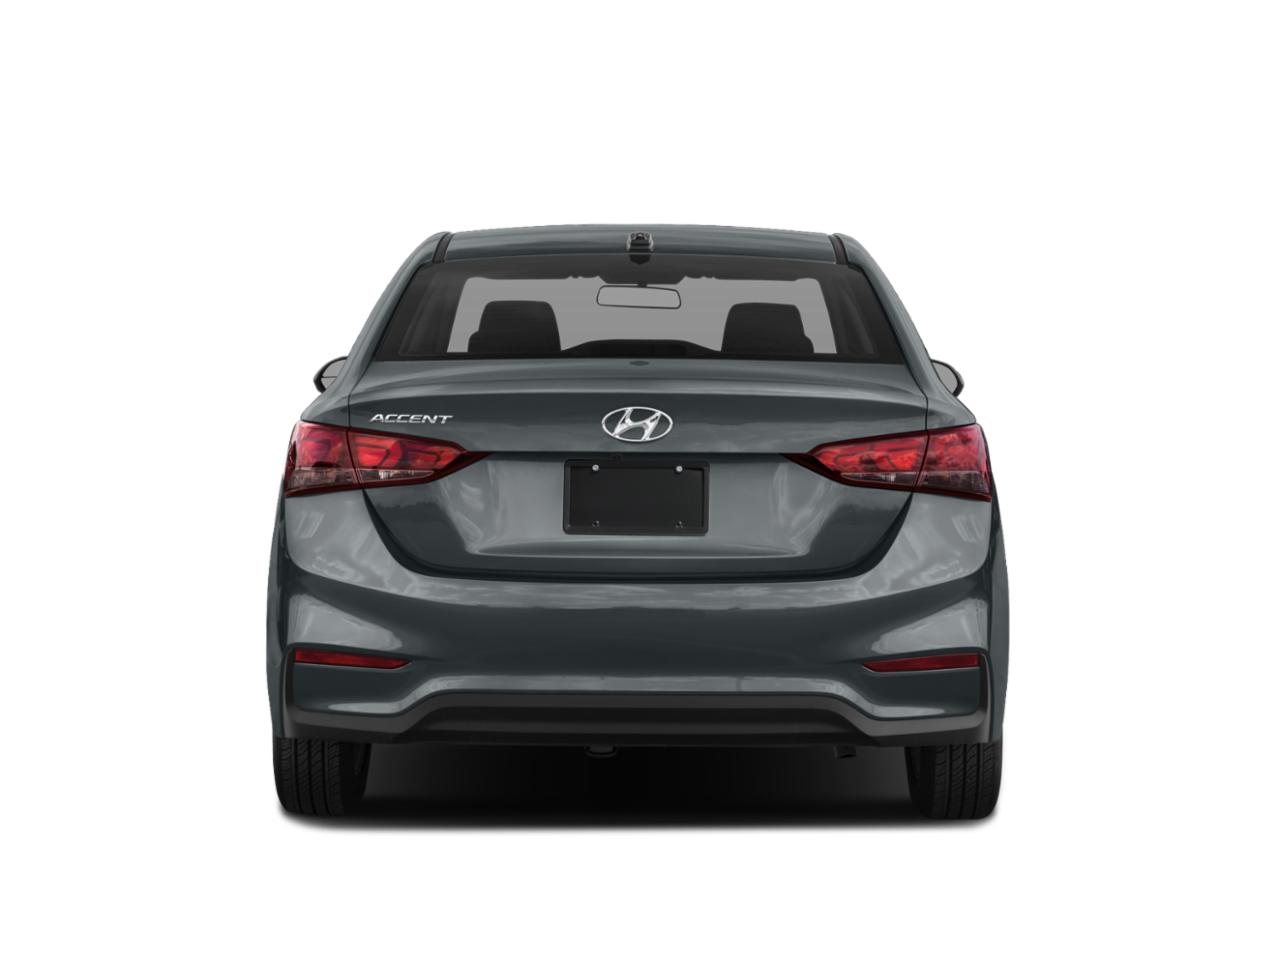 2020 Hyundai ACCENT Vehicle Photo in CLEARWATER, FL 33764-7163